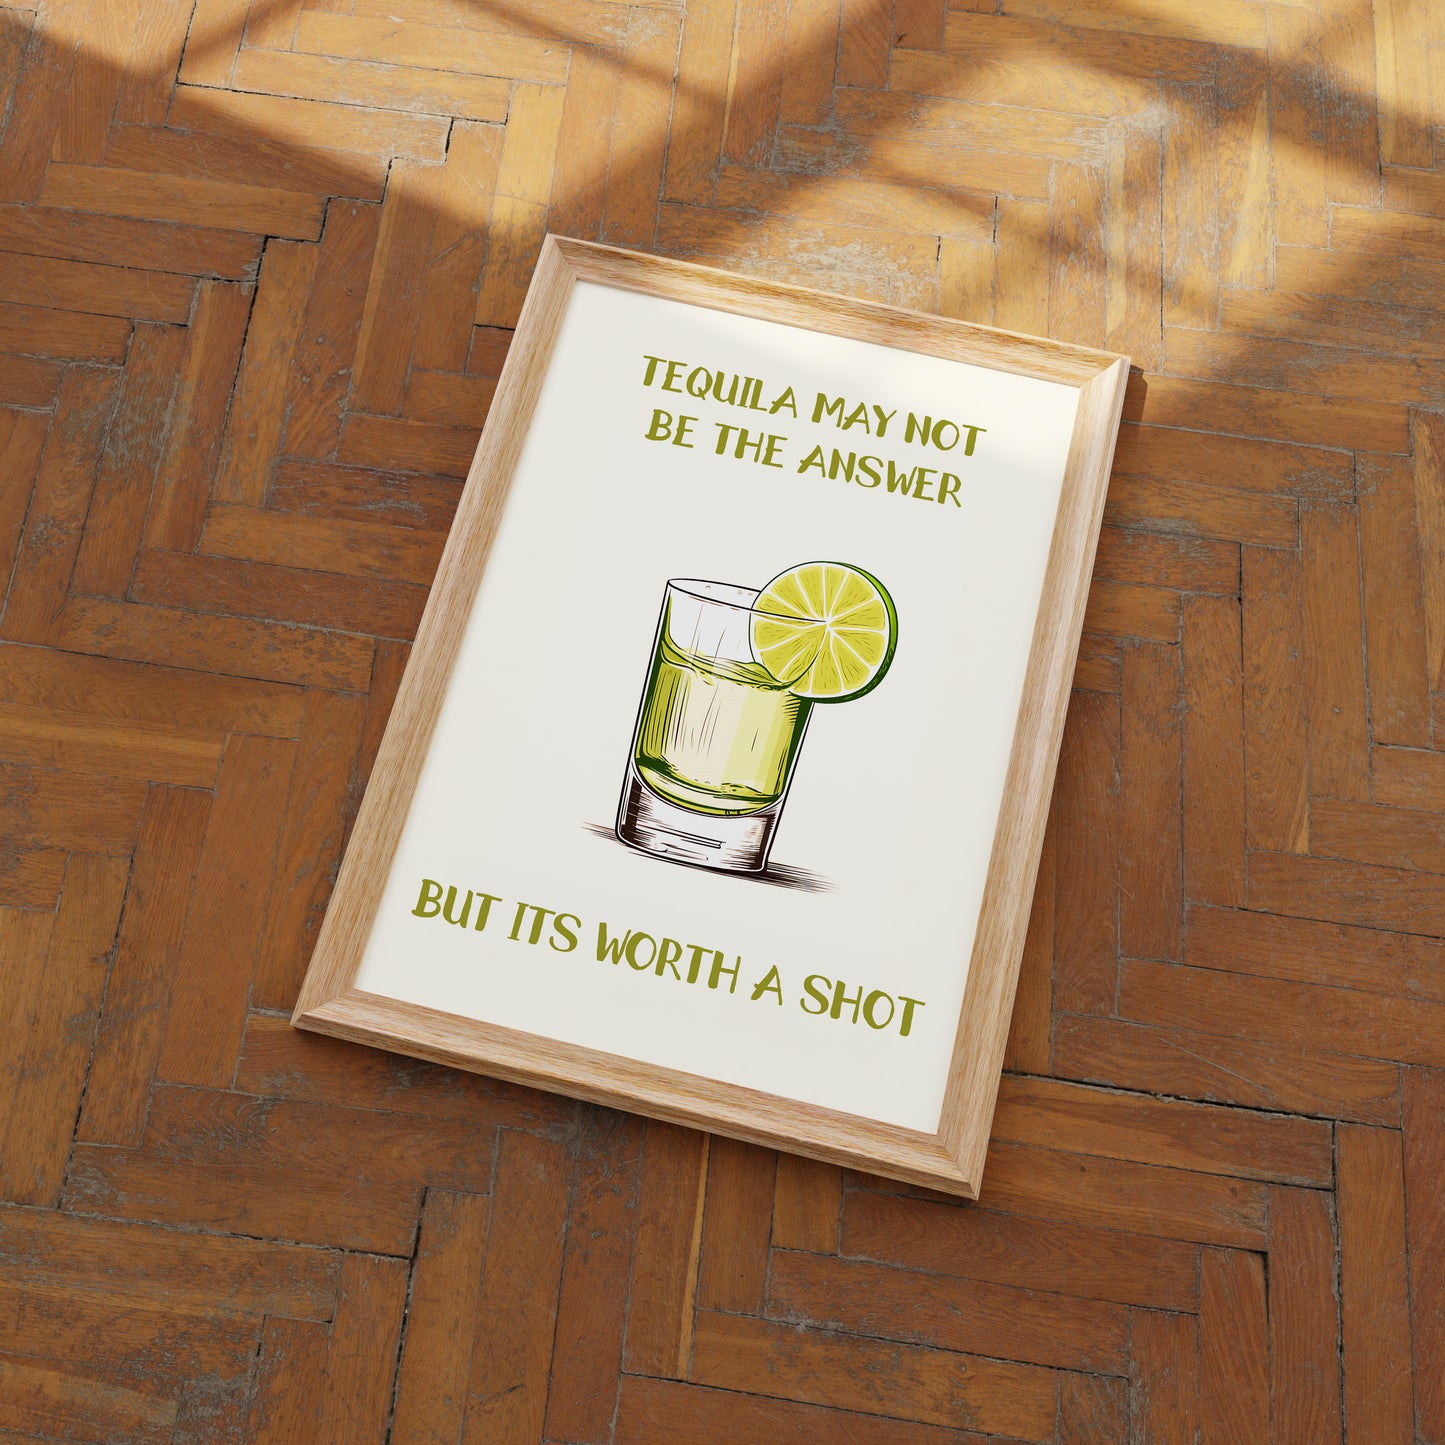 A framed poster on a wooden floor with a humorous quote about tequila and an illustration of a drink.